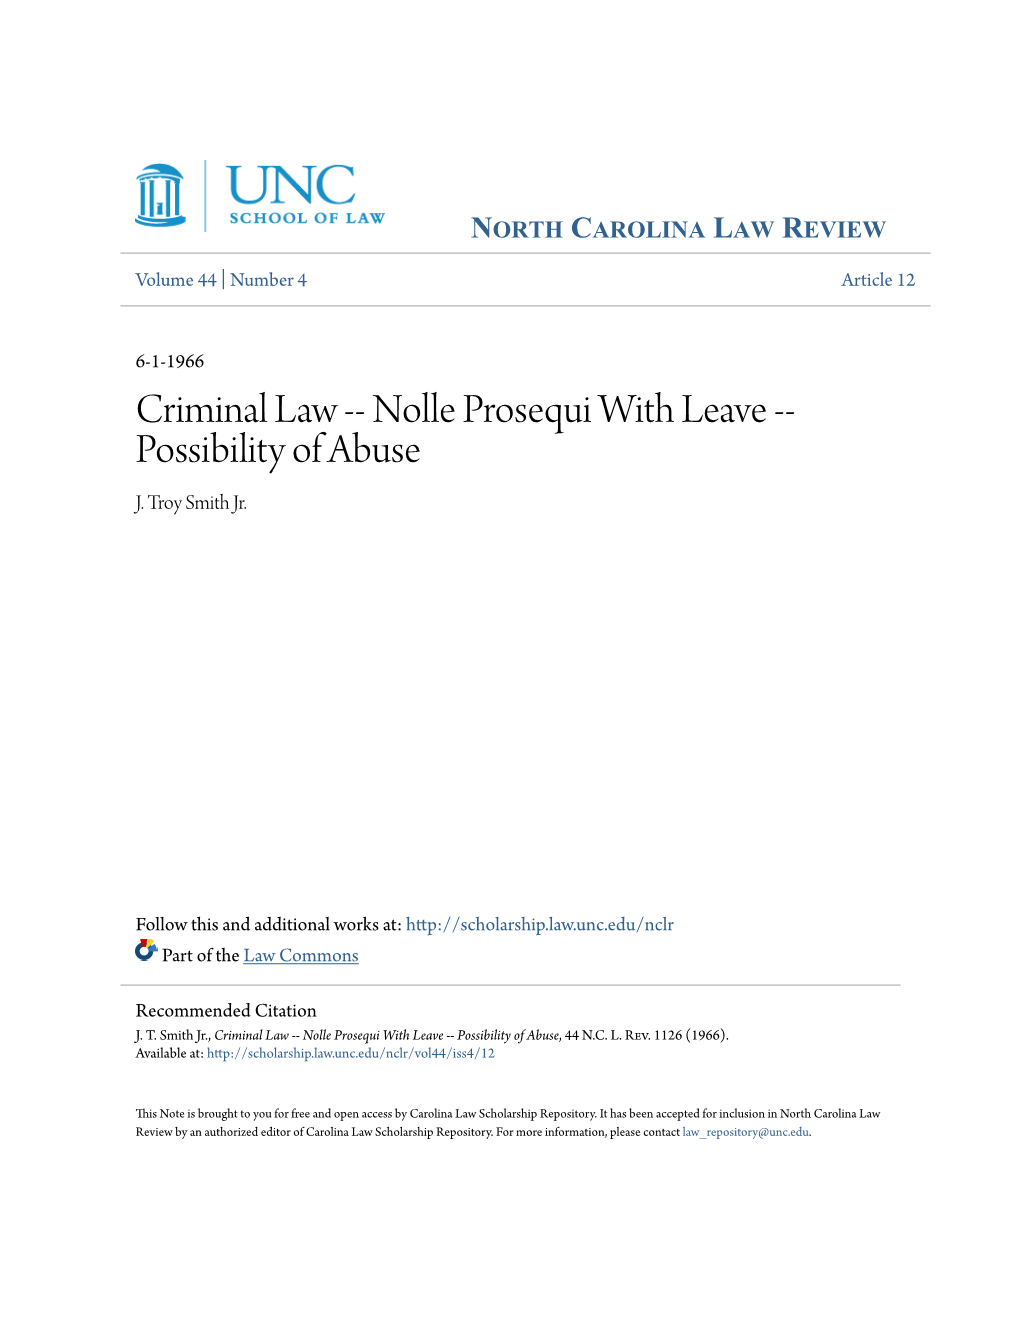 Criminal Law -- Nolle Prosequi with Leave -- Possibility of Abuse J